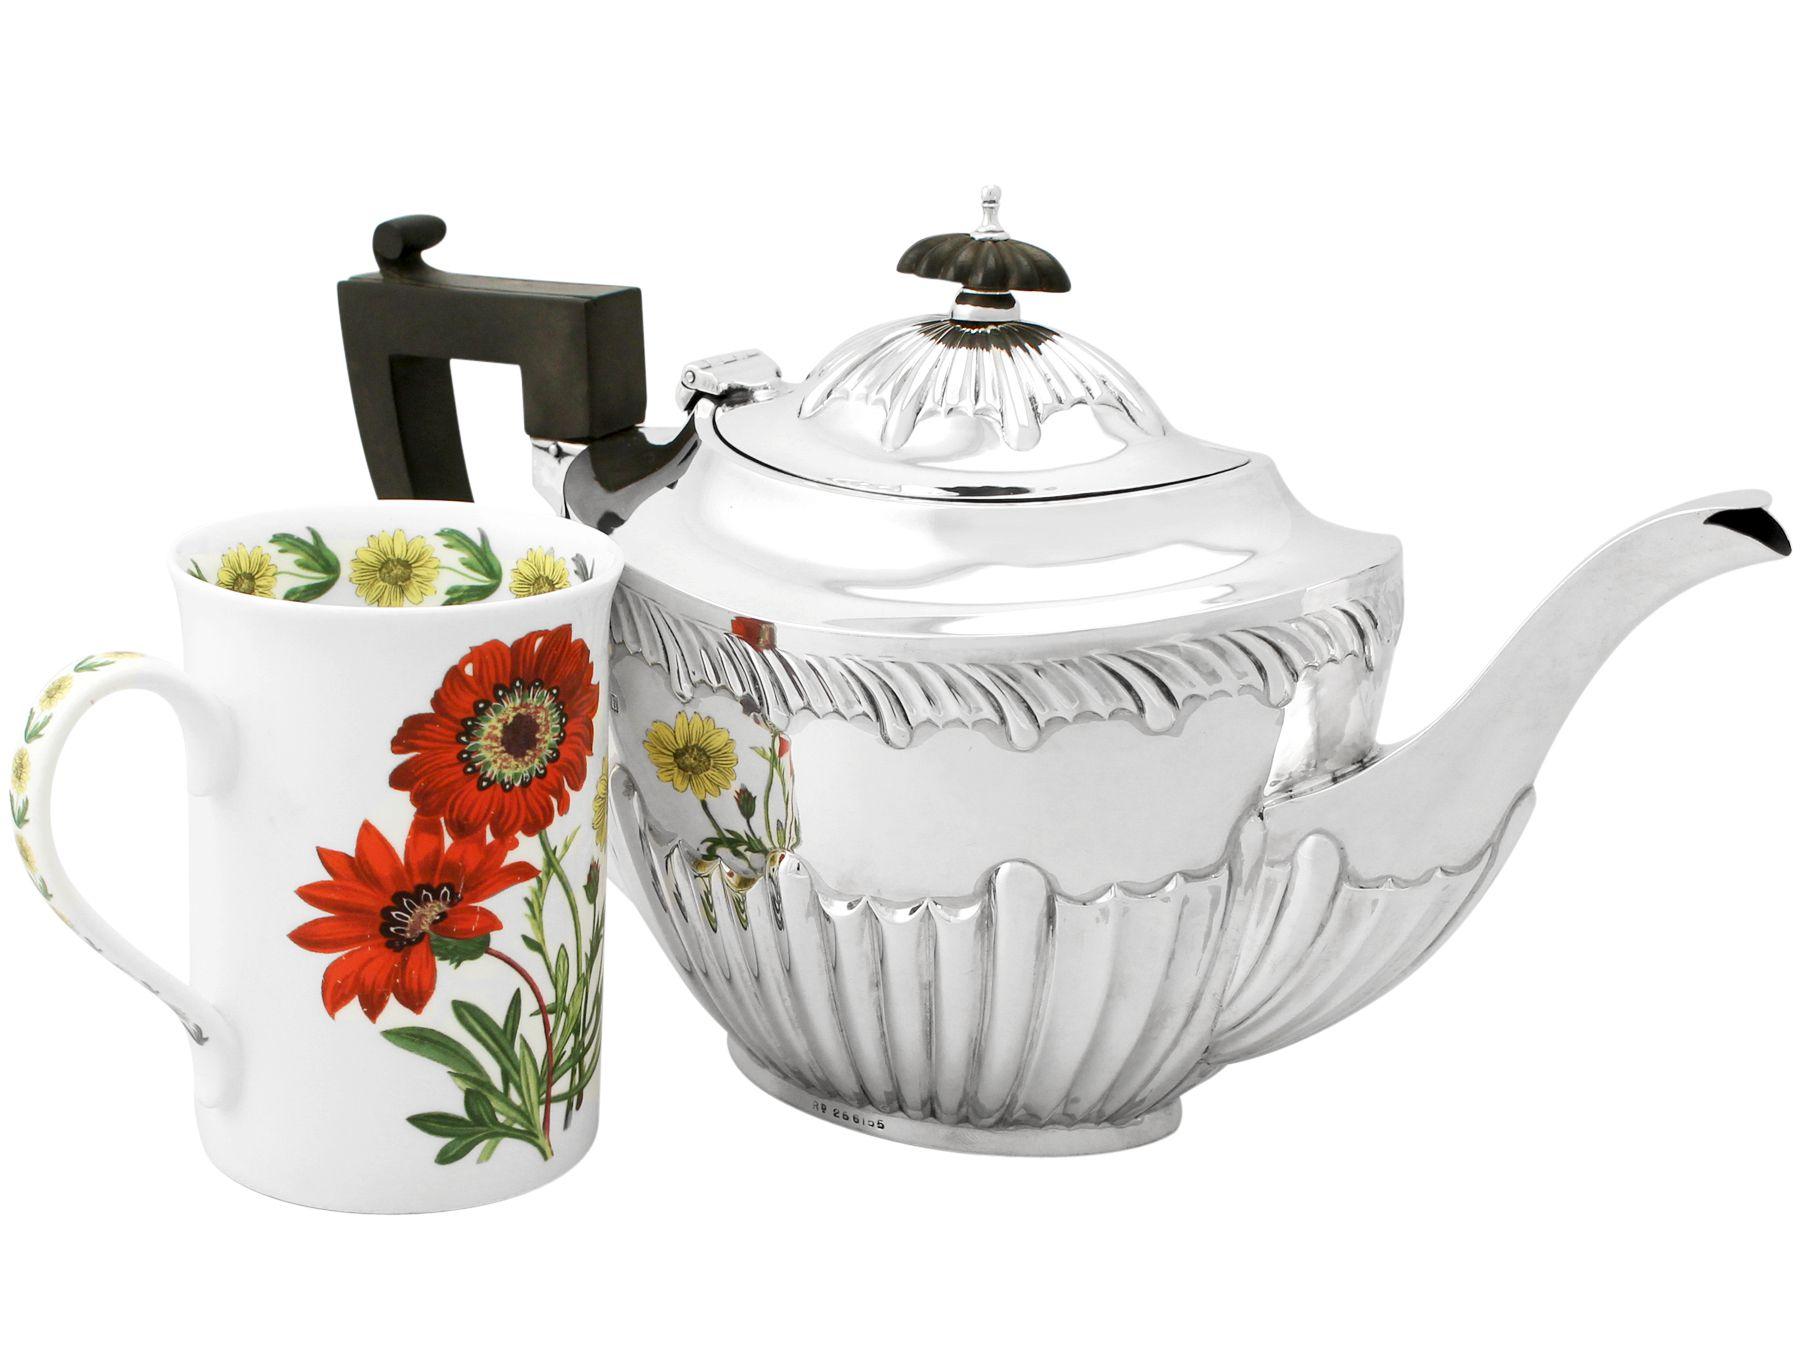 A fine and impressive antique Edwardian English sterling silver teapot in the Queen Anne style, part of our diverse teaware collection.

This impressive antique Edwardian sterling silver teapot has been modelled in the Queen Anne style onto an oval